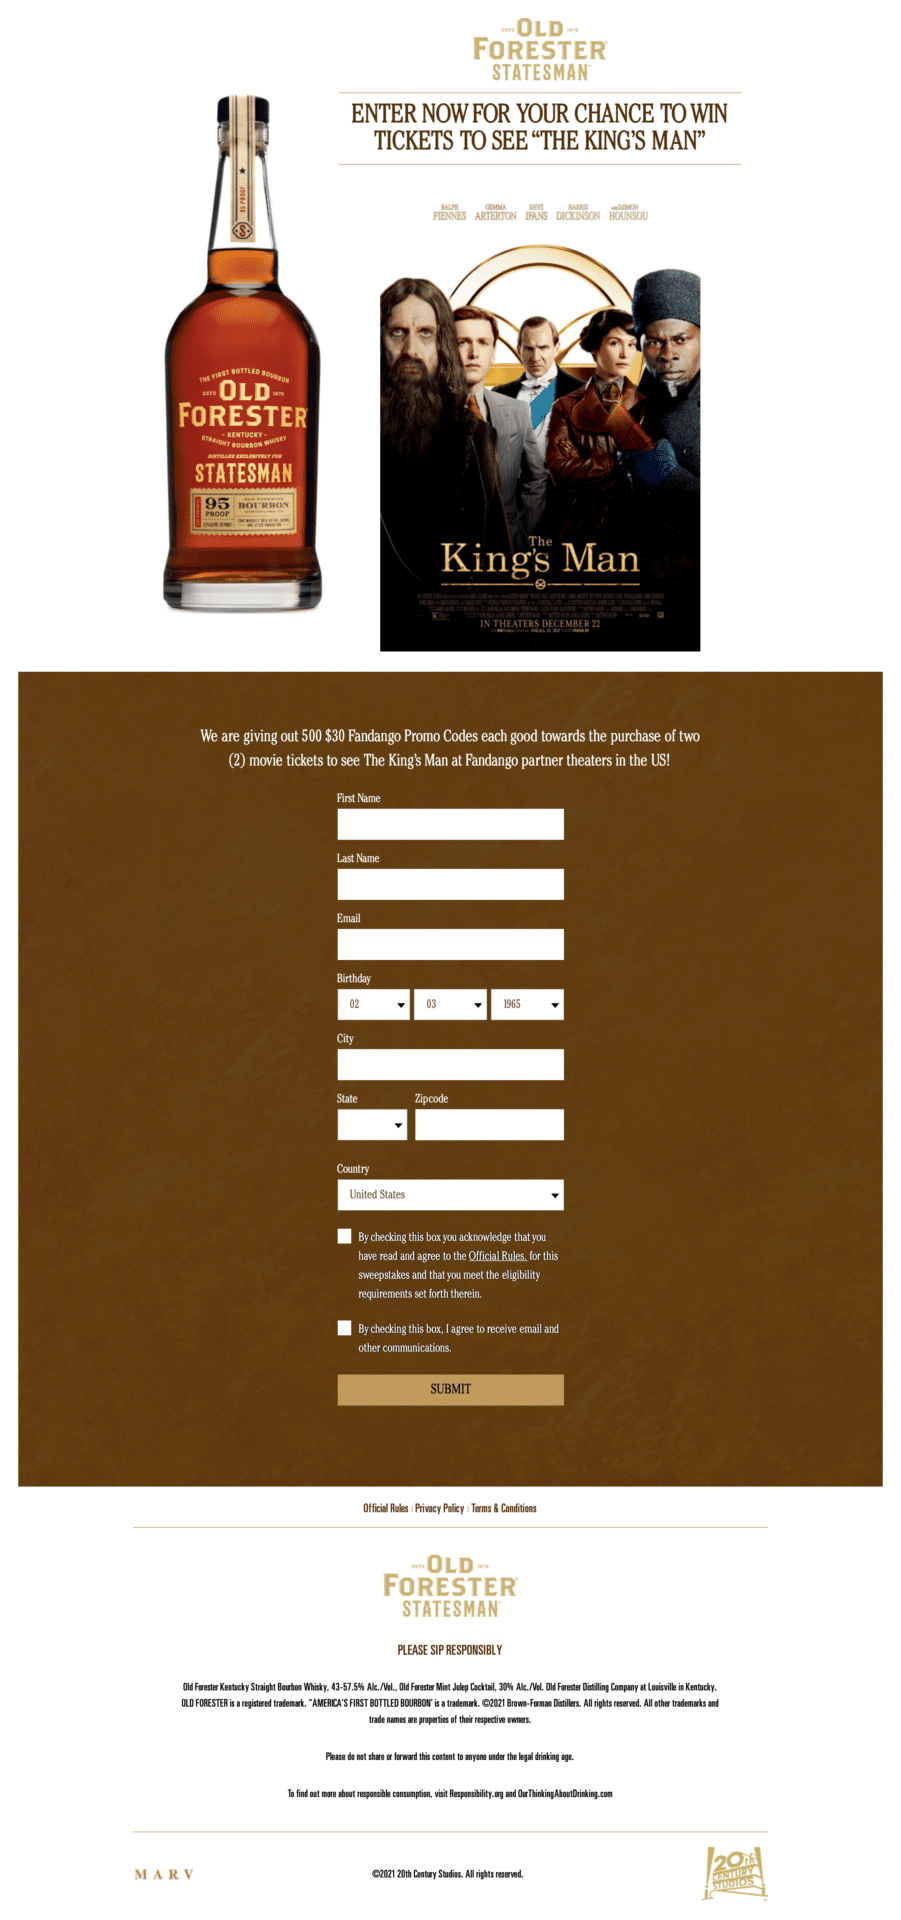 The King’s Man & Old Forrester Sweepstakes 